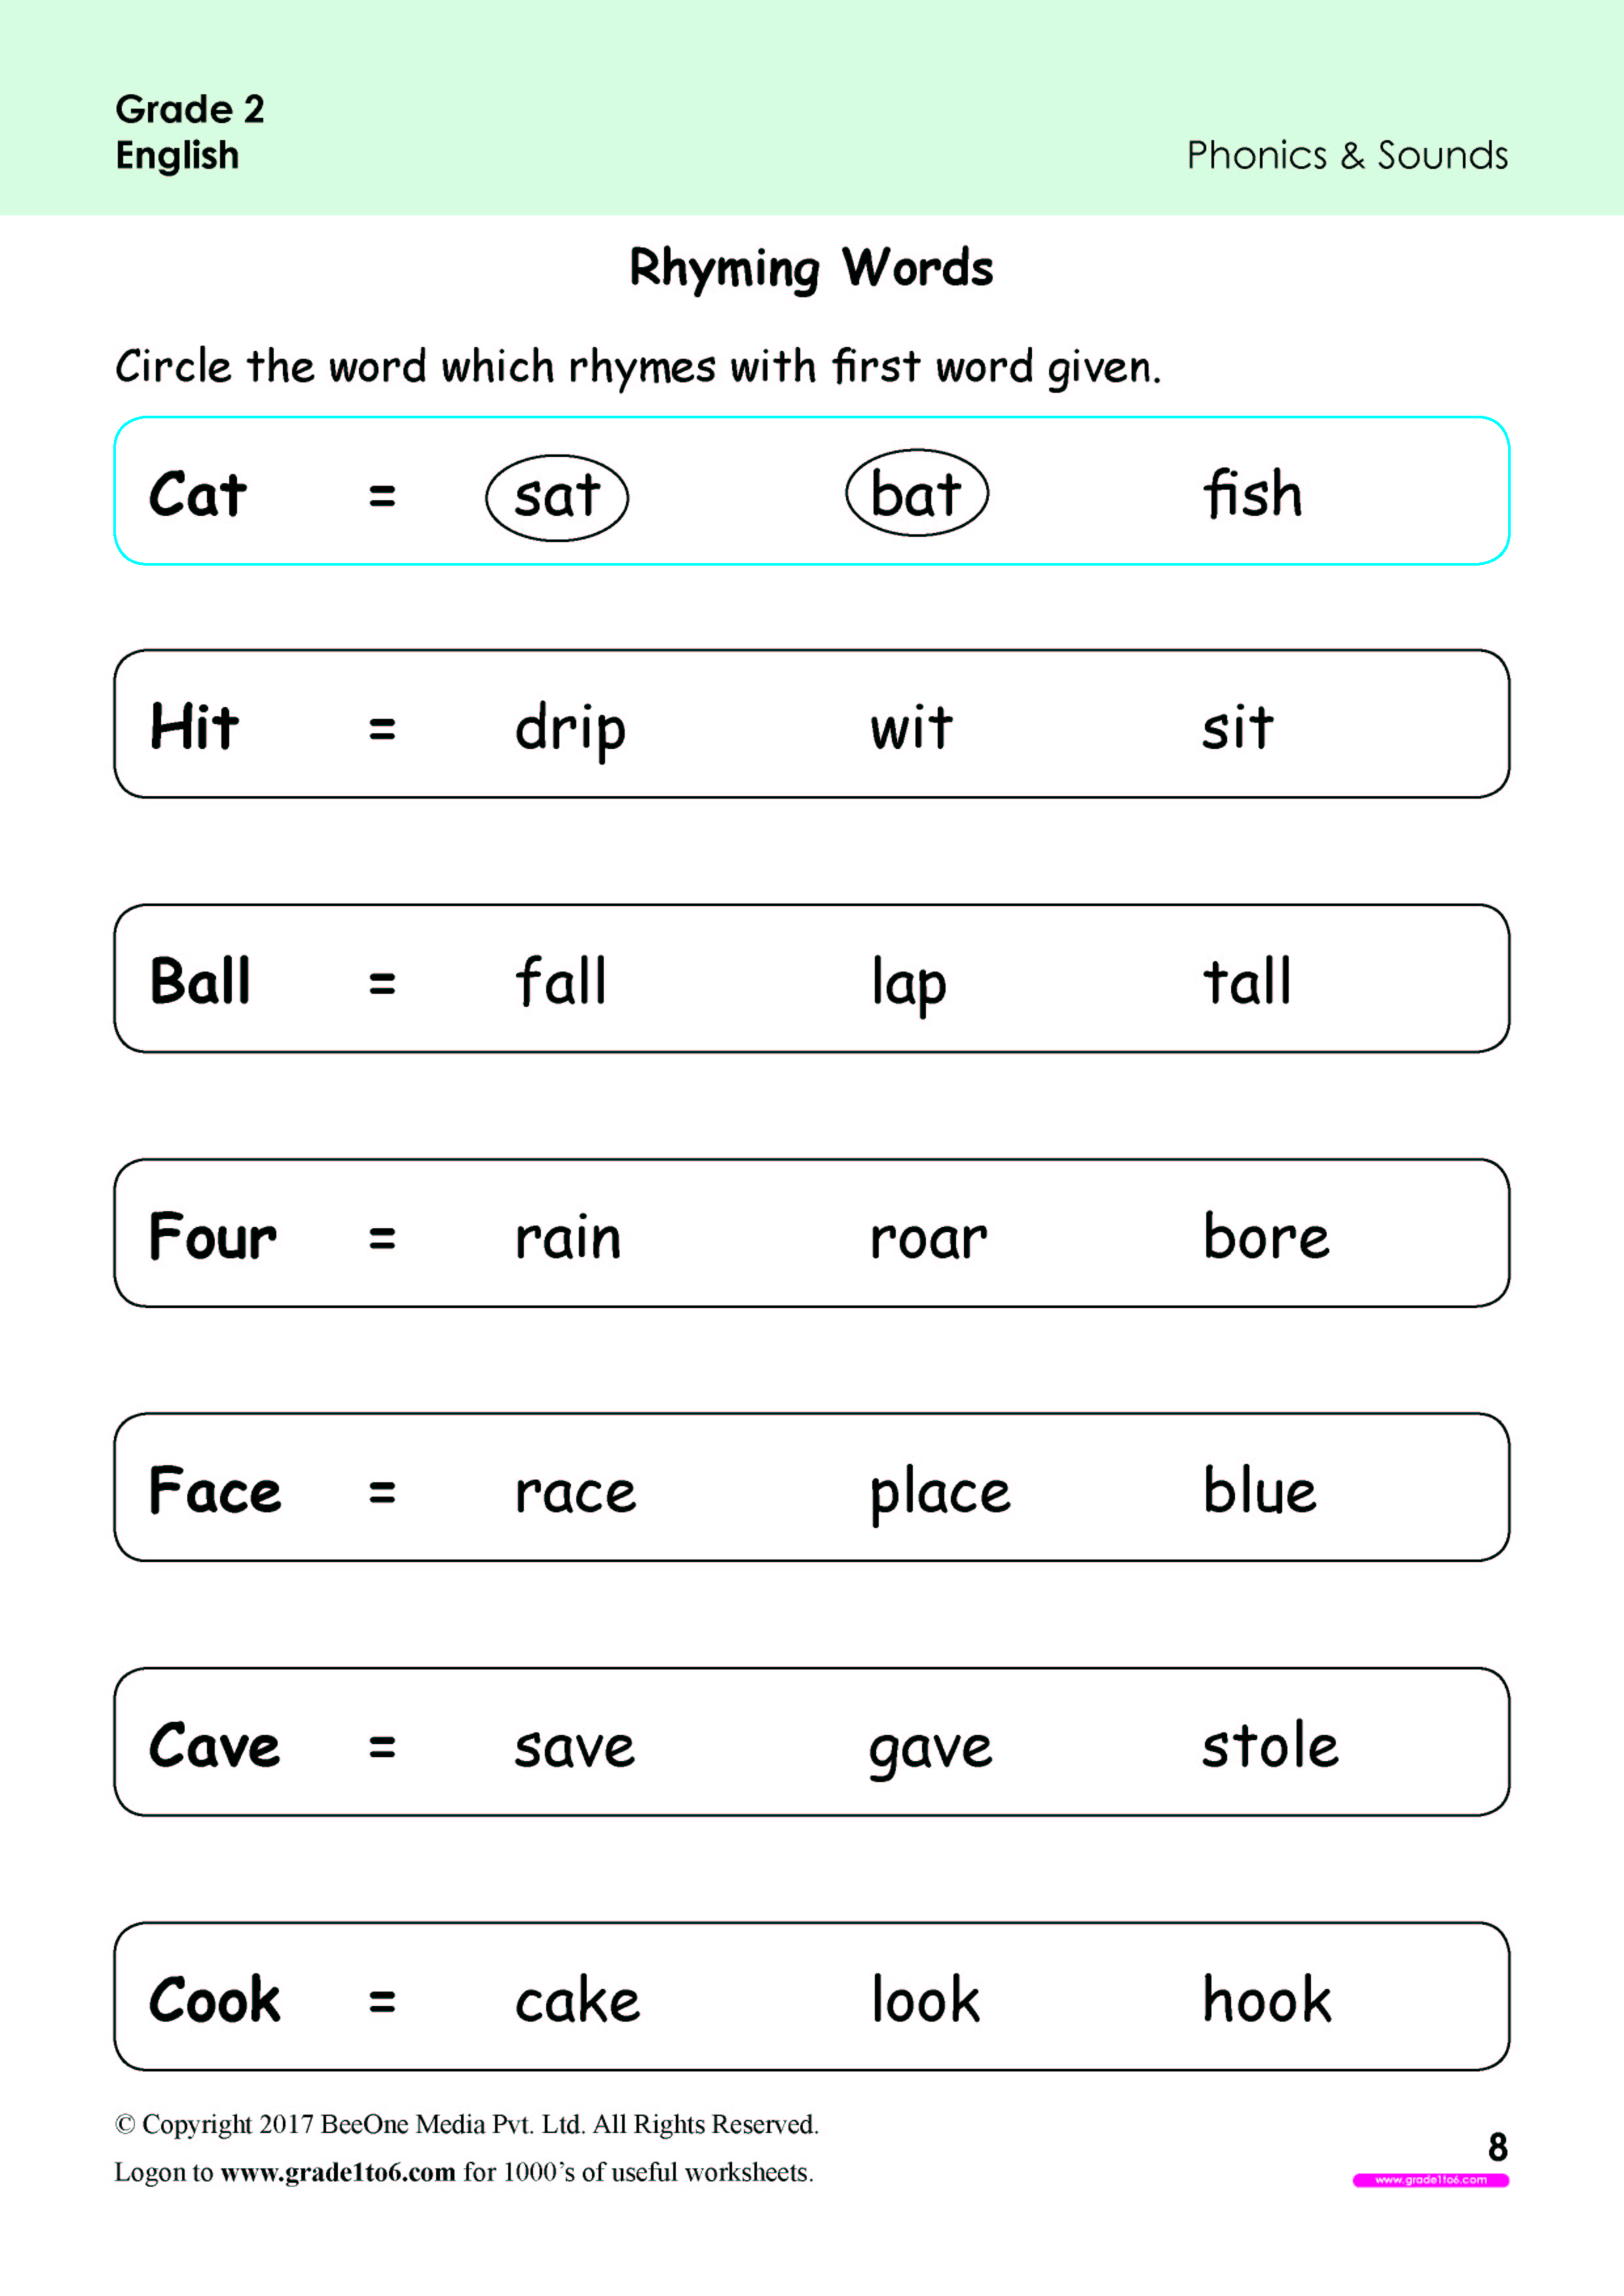 Rhyming Words Worksheets For Grade 2 www grade1to6